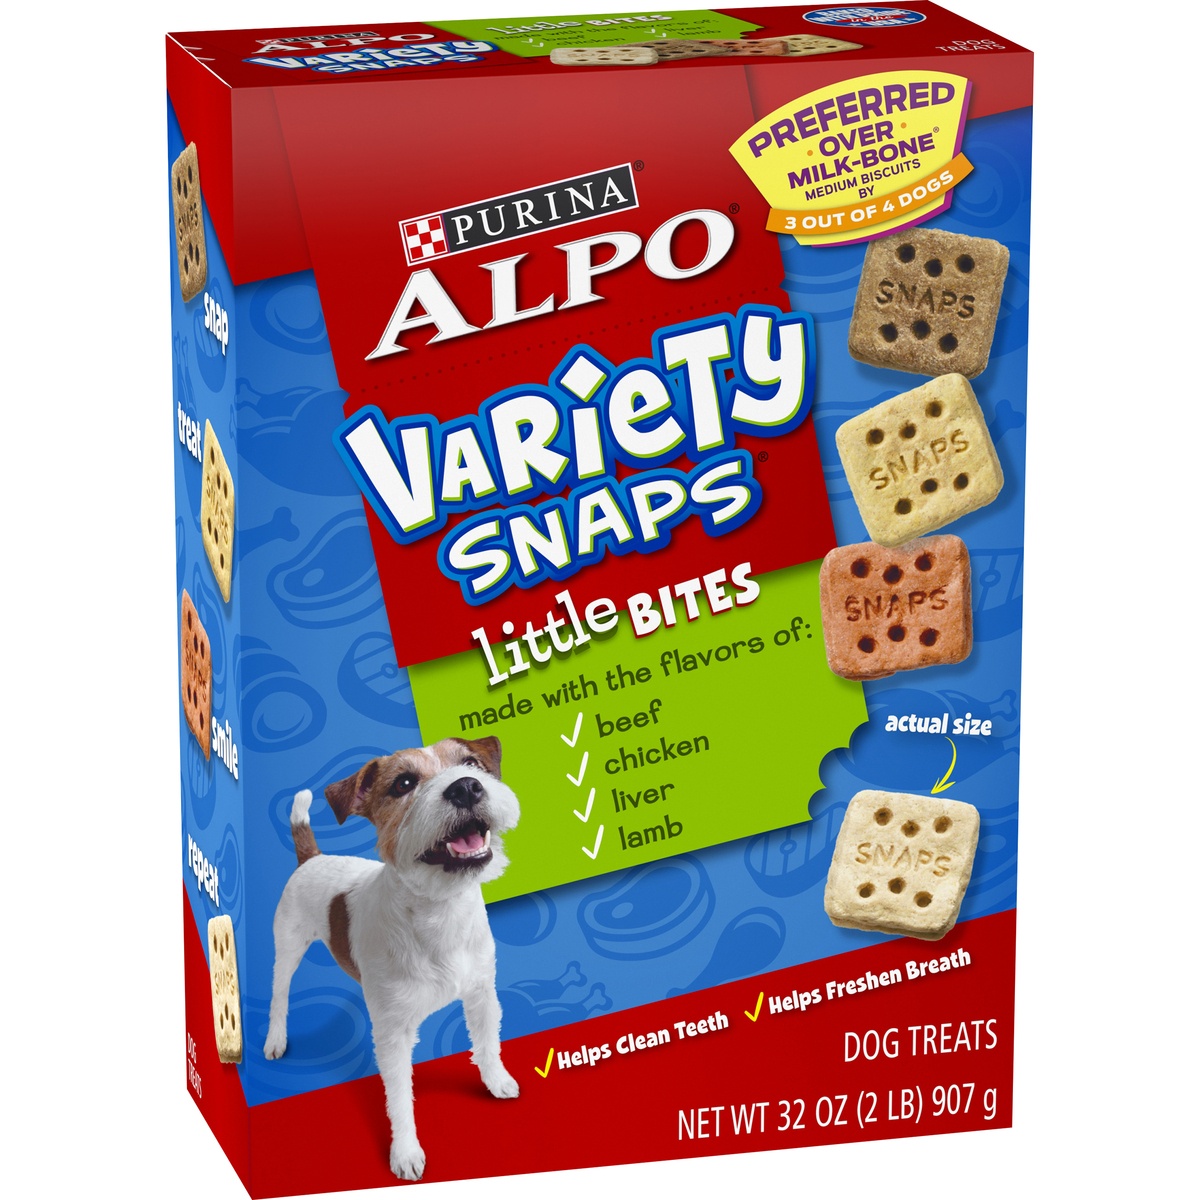 slide 2 of 11, Purina ALPO Variety Snaps Little Bites Dog Treats with Beef, Chicken, Liver & Lamb Flavors, 32 oz